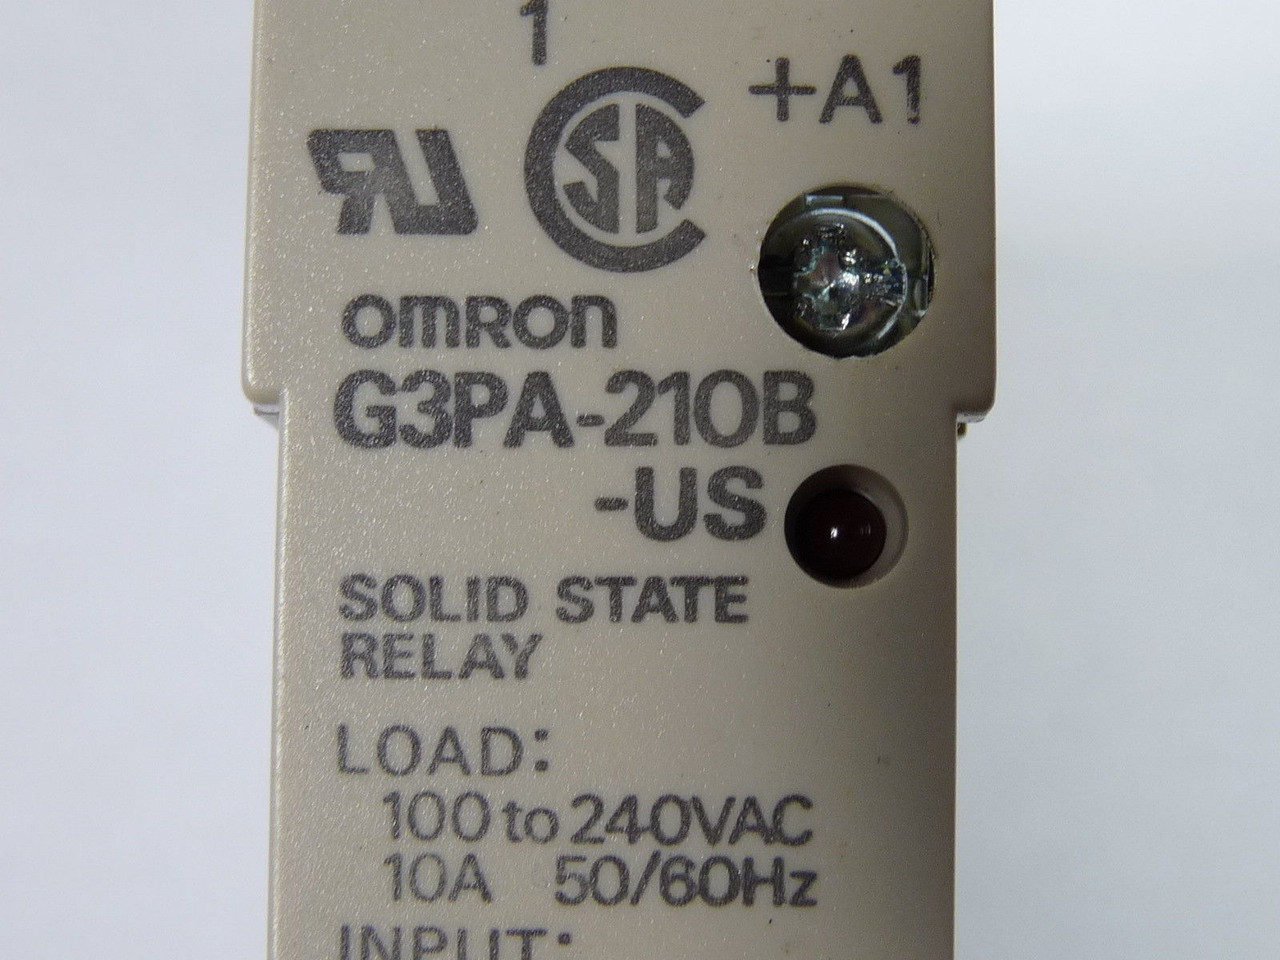 Omron G3PA-210B-US Solid State Relay 240VAC 10A 50/60Hz USED